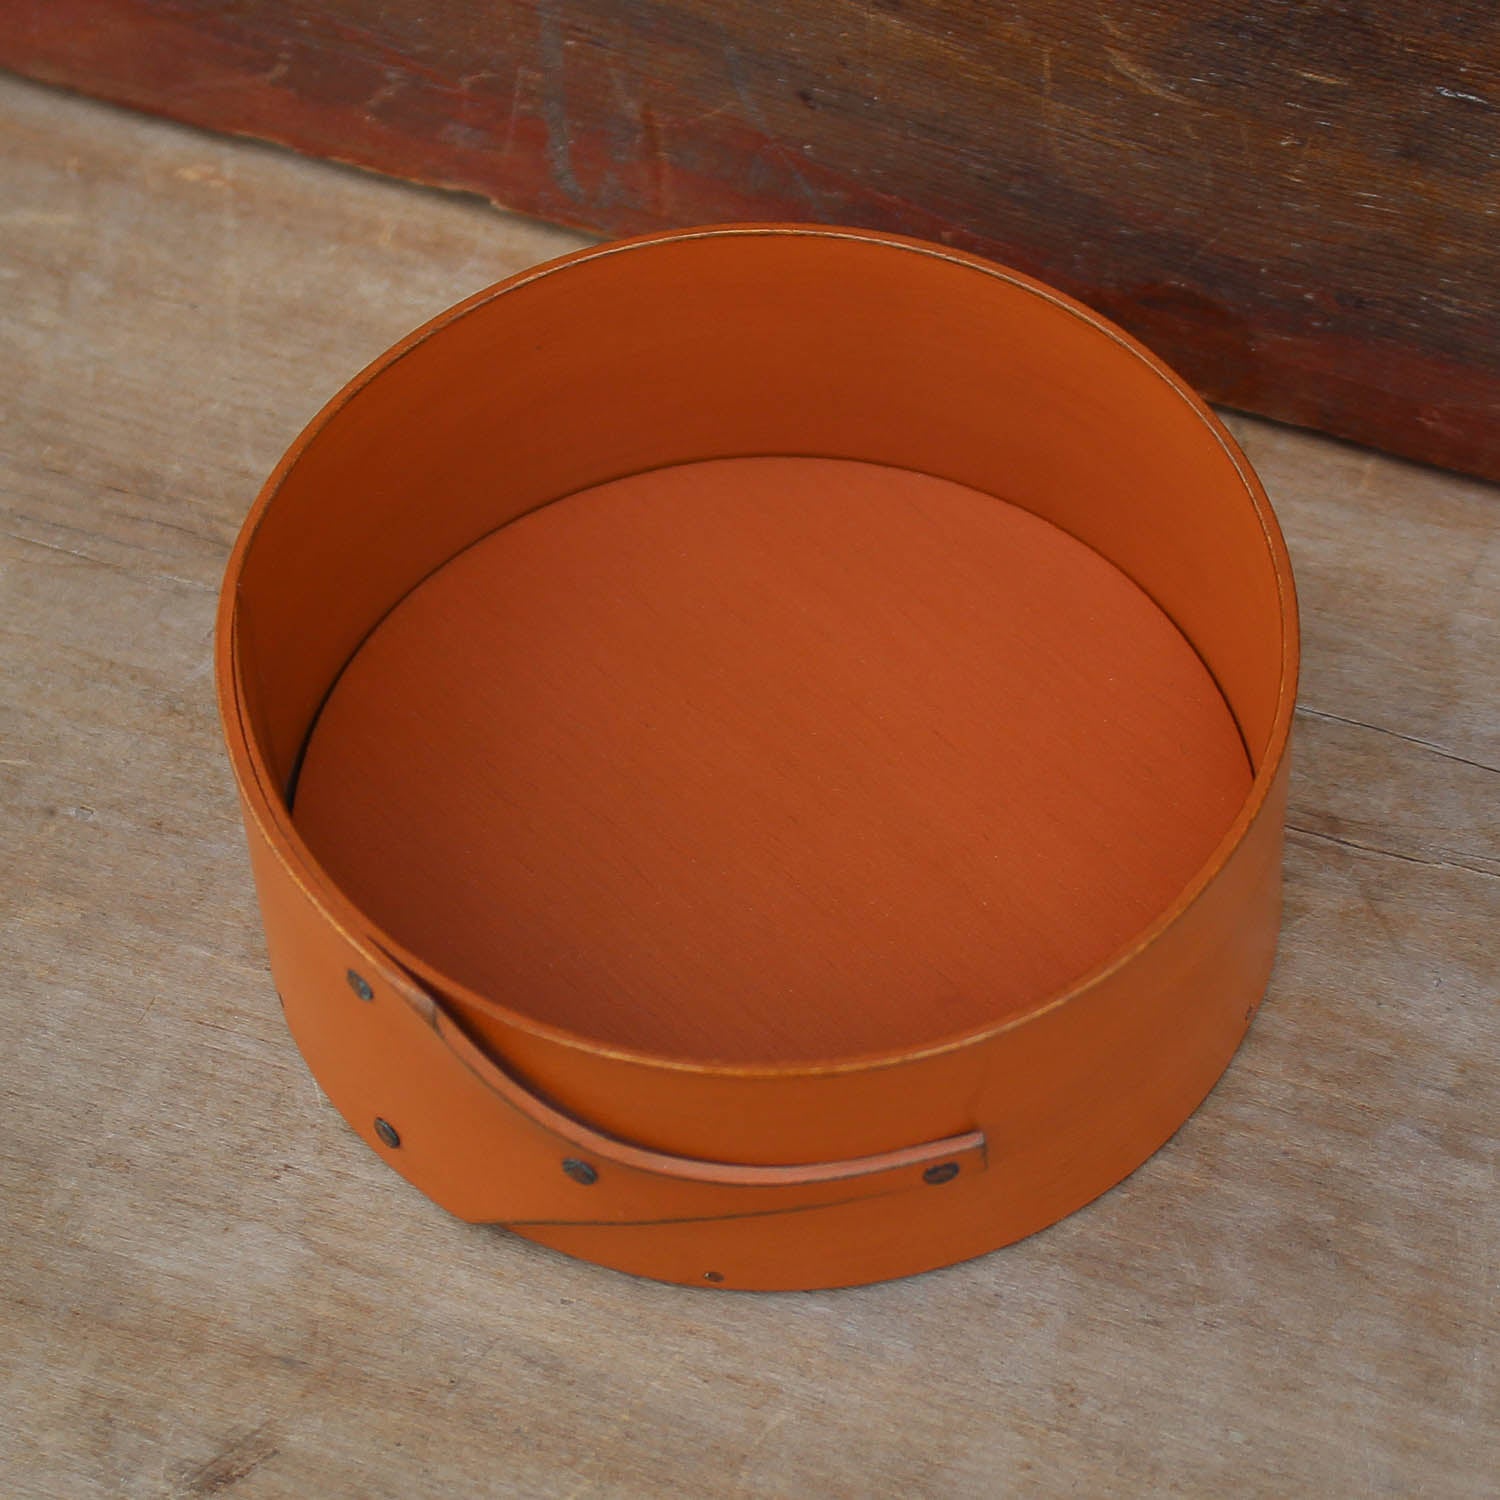 Shaker Style Pin Cushion Base for Needlework, LeHays Shaker Boxes, Handcrafted in Maine, Pumpkin Milk Paint Finish, Top View